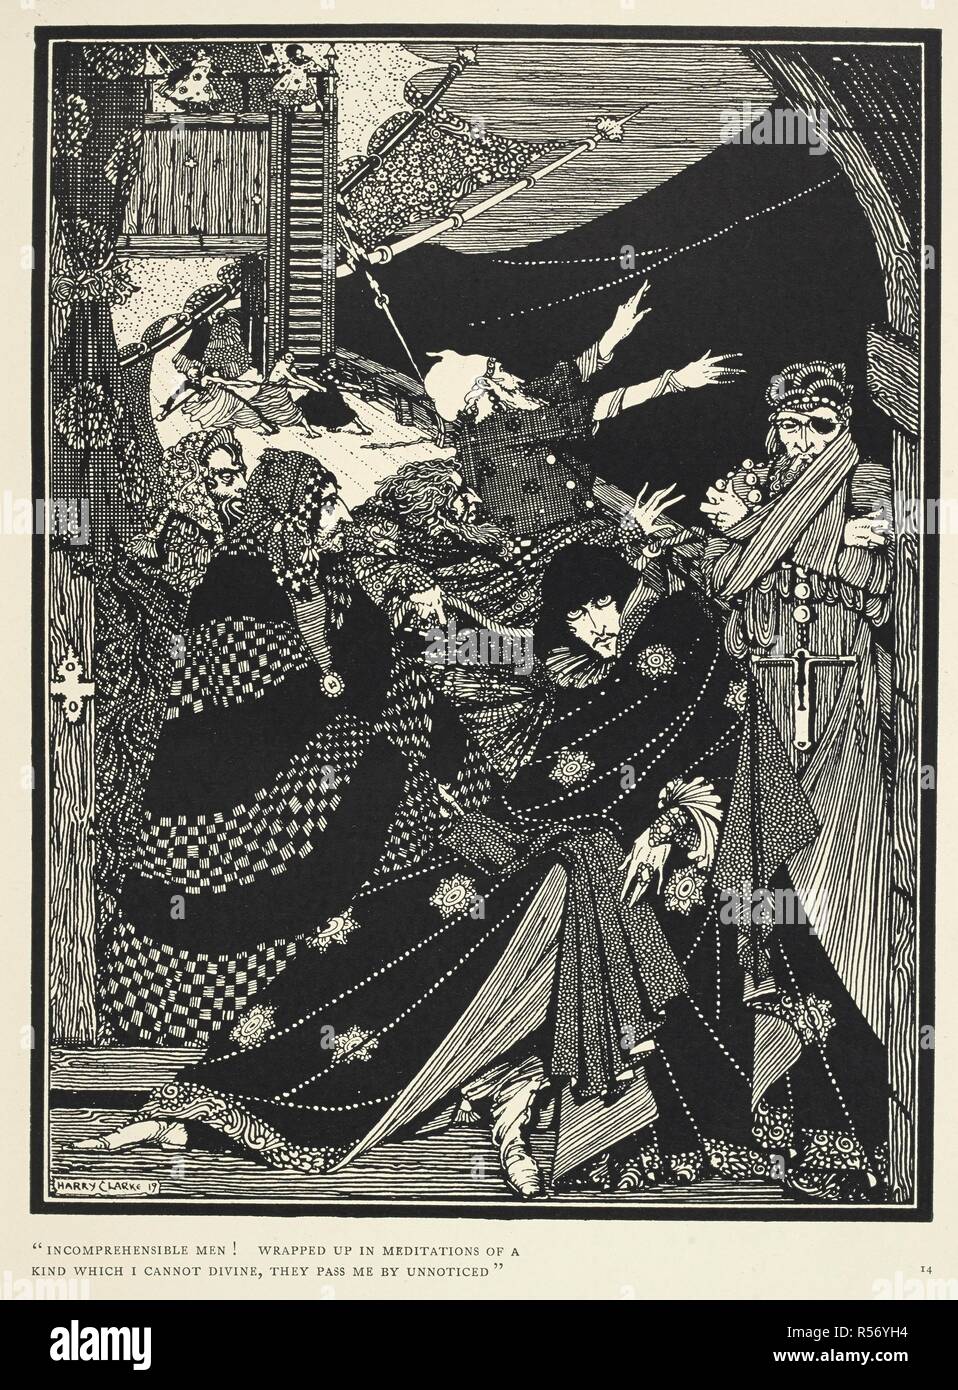 'Incomprehensible men! Wrapped up in meditations of a kind which I cannot divine, they pass me by unnoticed.' Illustration for the story 'Ms. in a bottle'. Tales of Mystery and Imagination ... Illustrated by Harry Clarke. London : G. G. Harrap ; New York : Brentano's, [1923]. Source: 12703.i.44 plate opposite page 14. Stock Photo